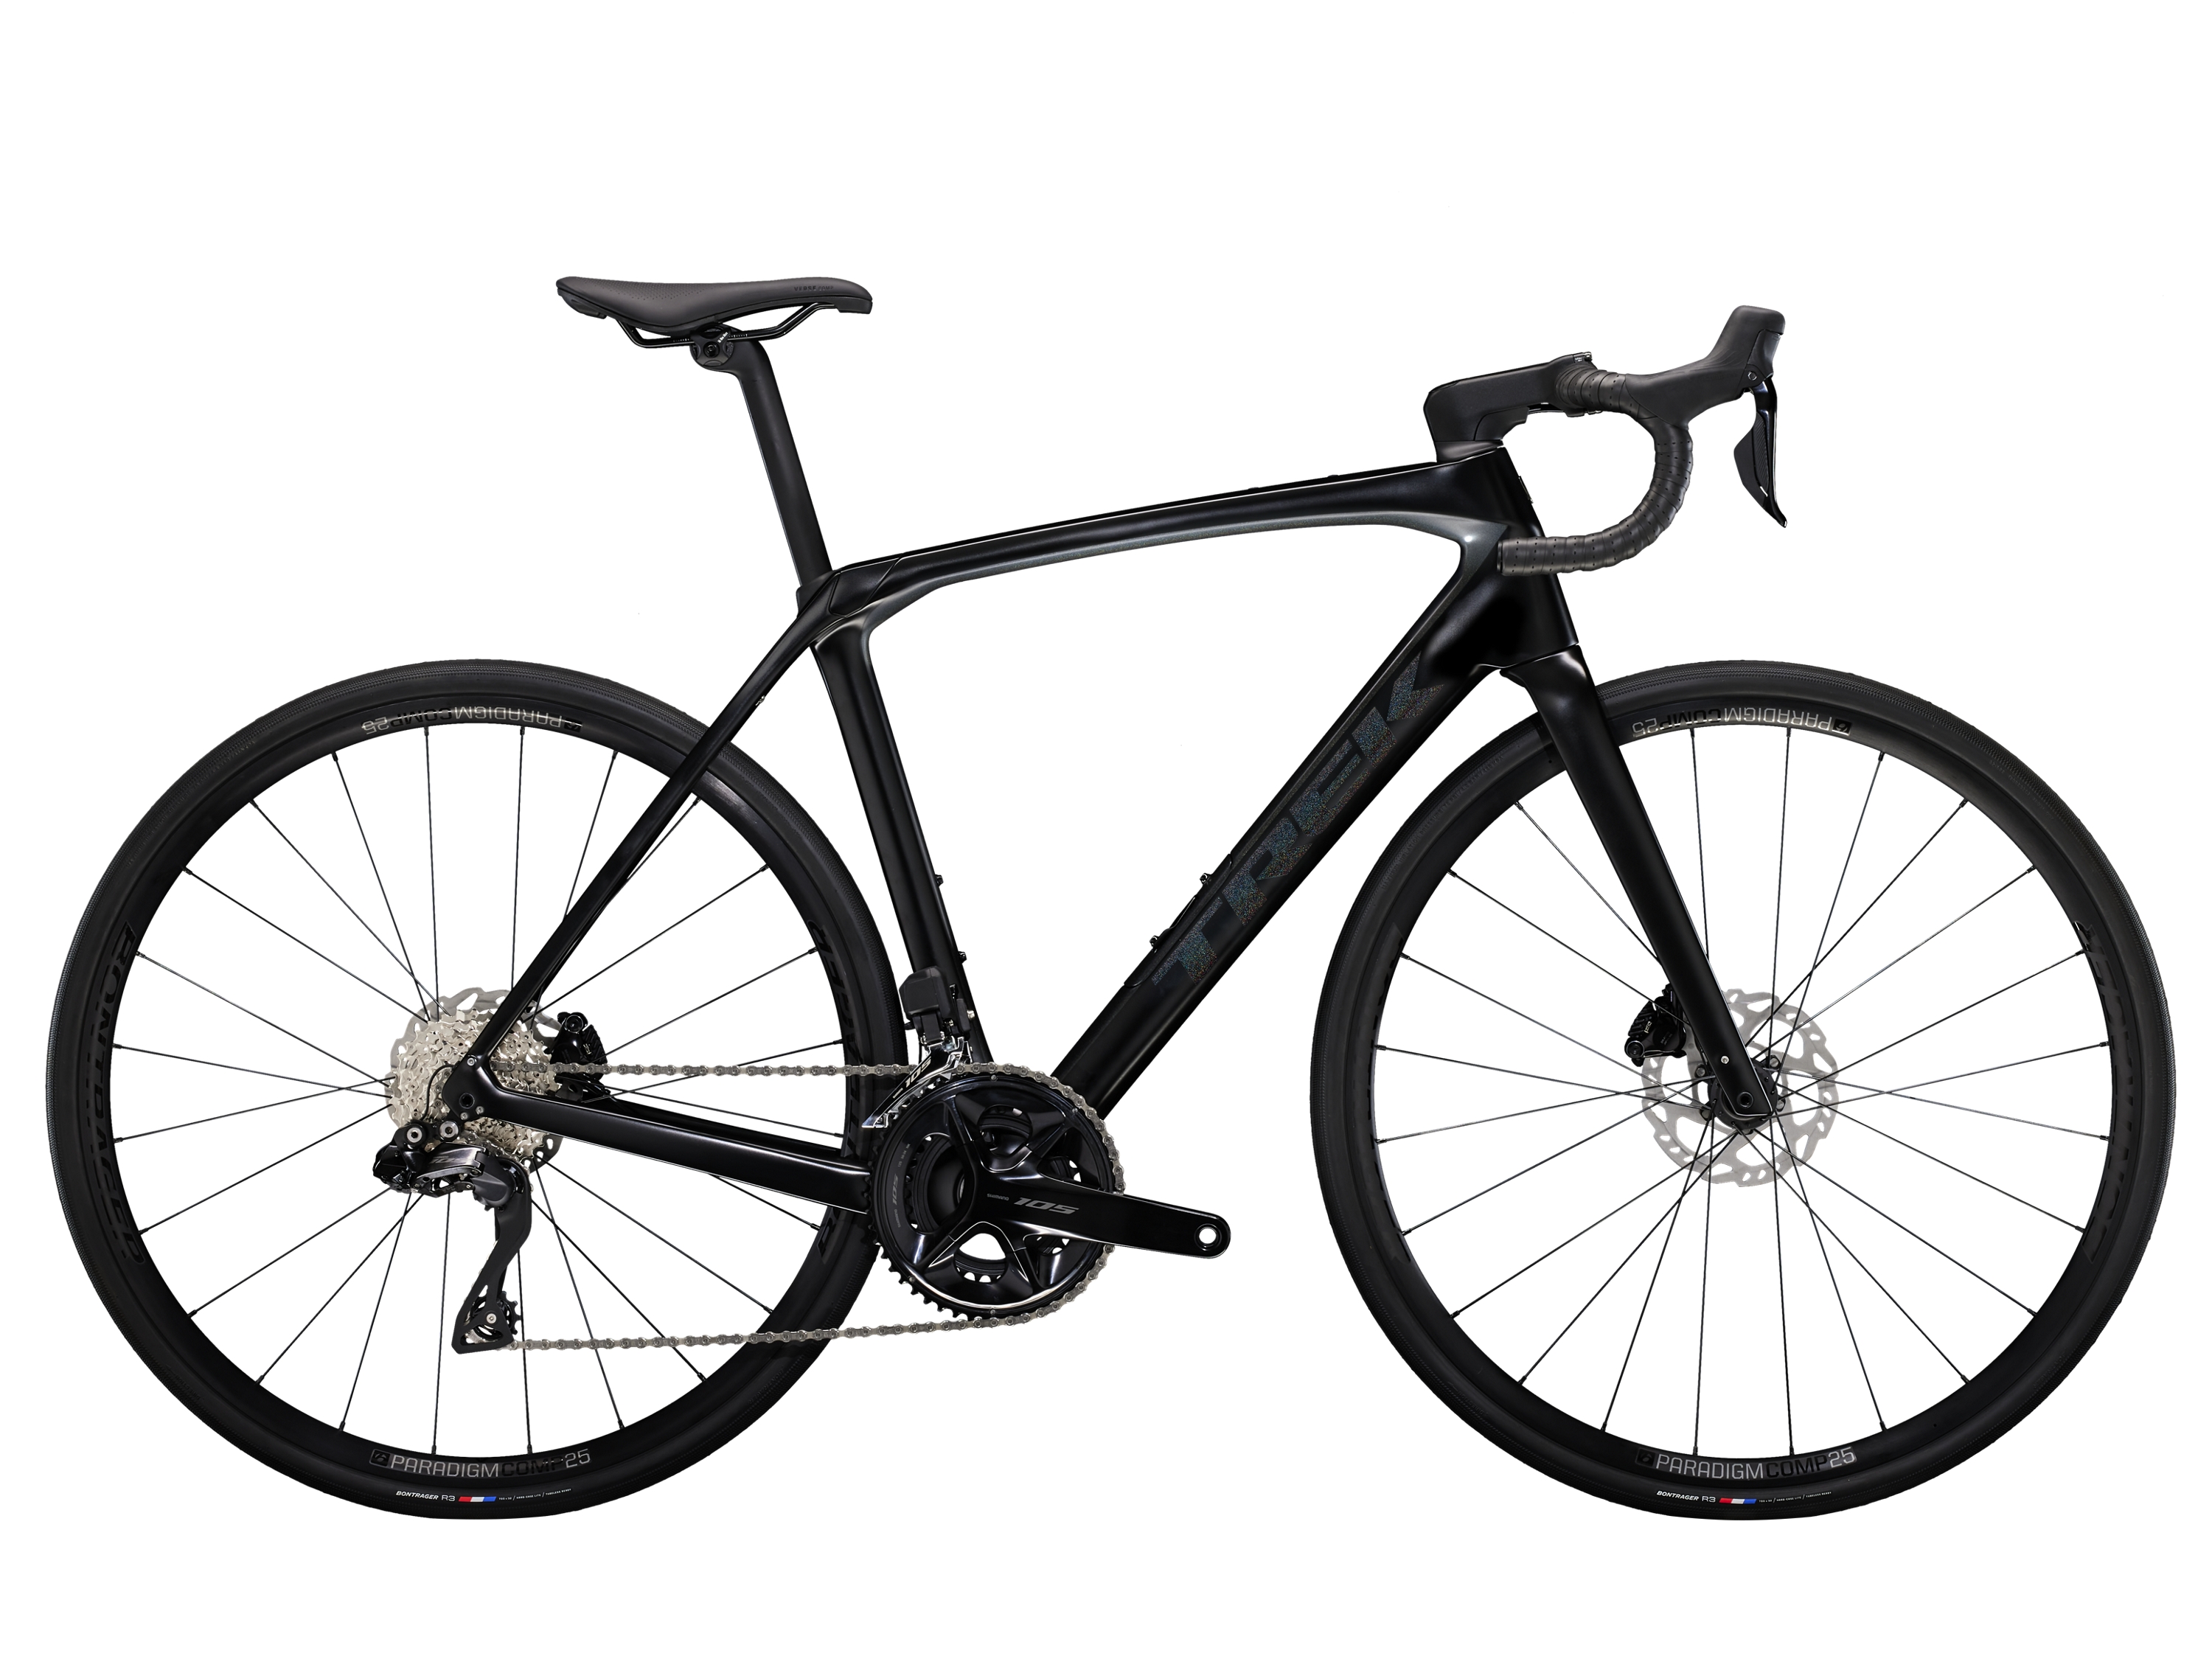 <a href="https://cycles-clement.be/product/domane-sl-6-56-satin-trek-black/">DOMANE SL 6 56 SATIN TREK BLACK</a>